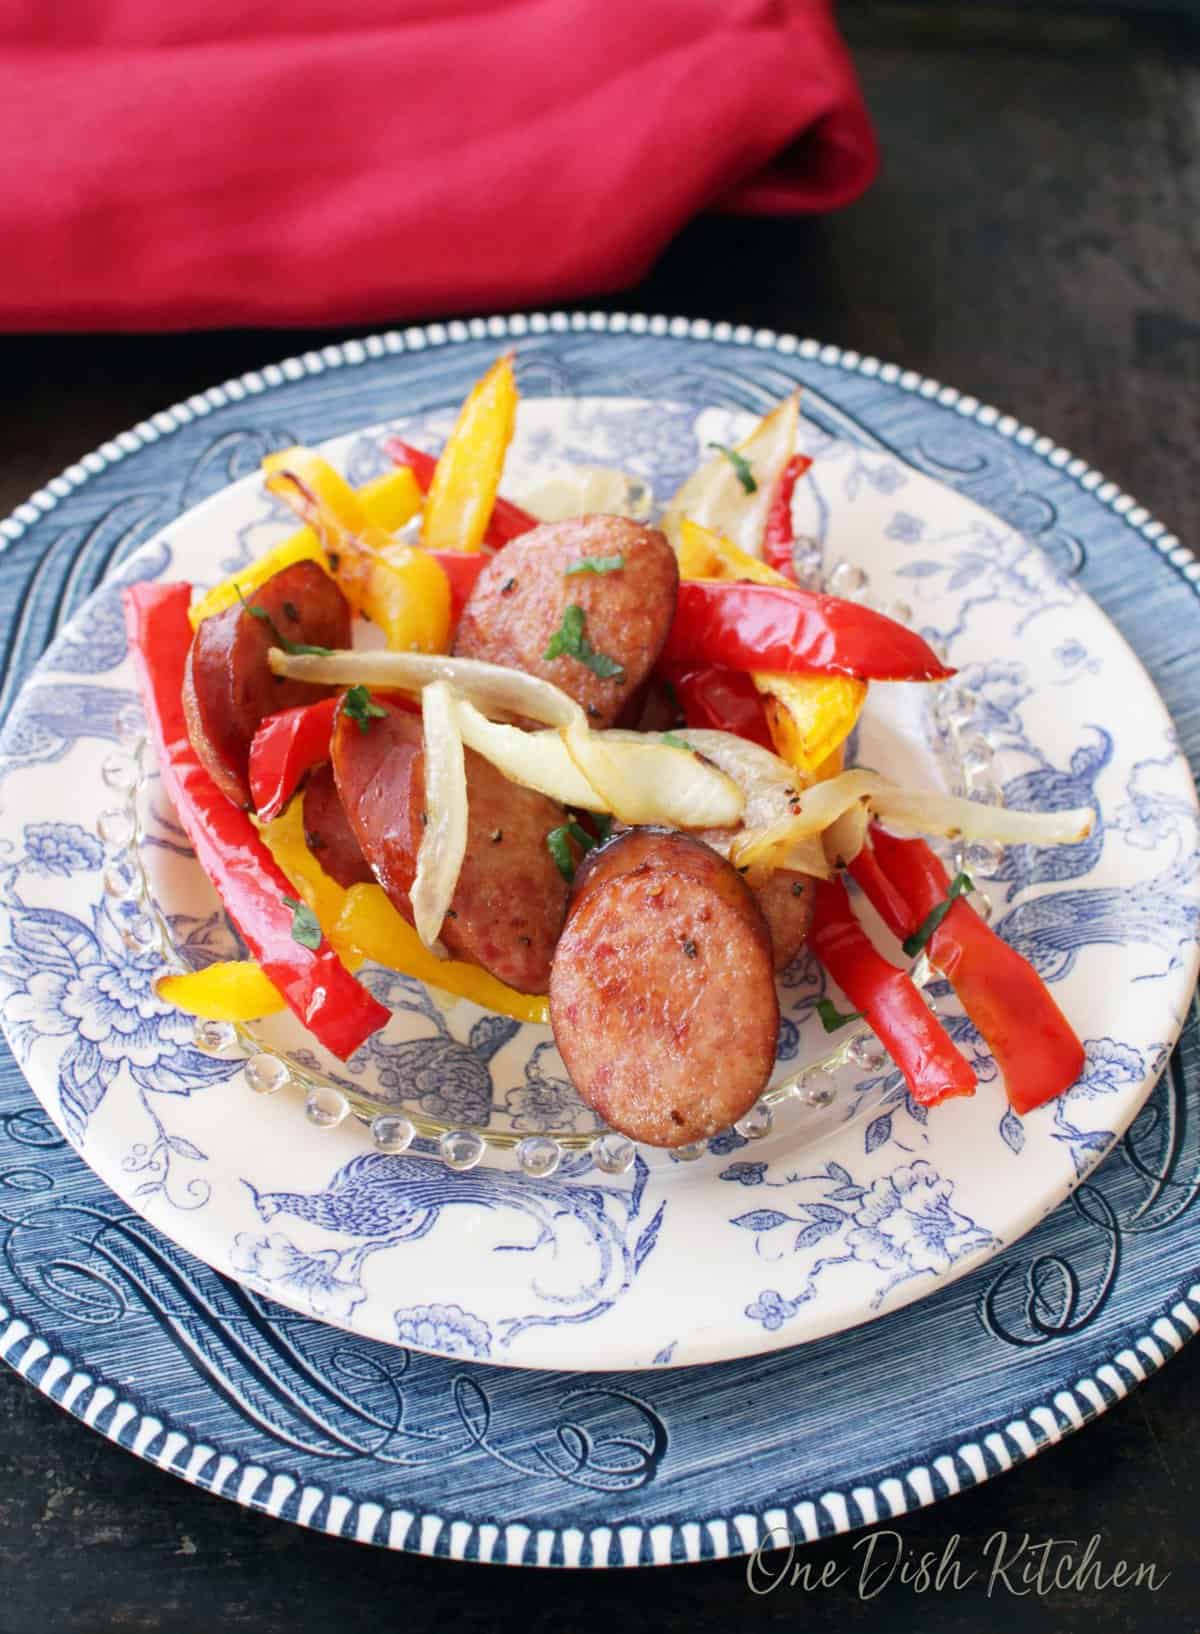 https://onedishkitchen.com/wp-content/uploads/2018/10/sausage-peppers-one-dish-kitchen-orig-1-scaled.jpg